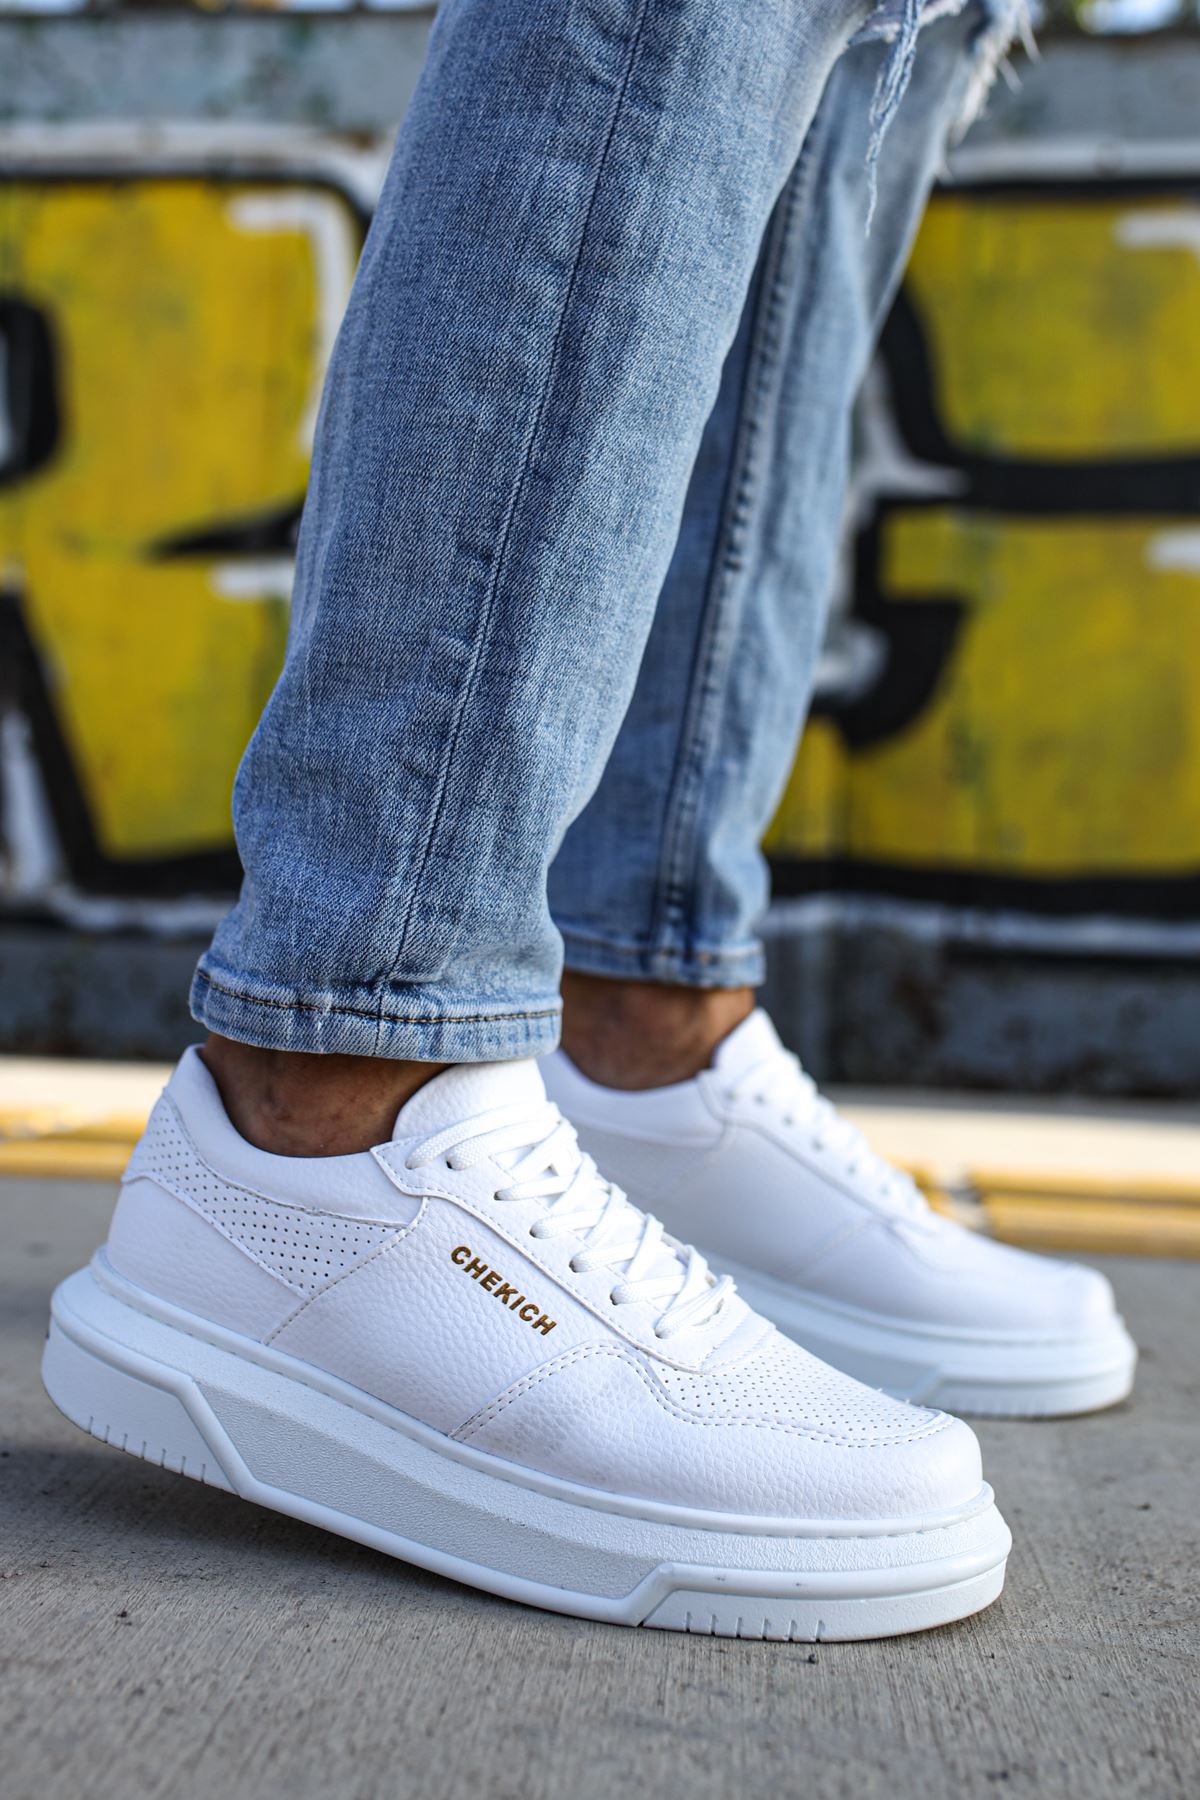 CH075 Men's Unisex Full White Casual Sneaker Sports Shoes - STREETMODE ™